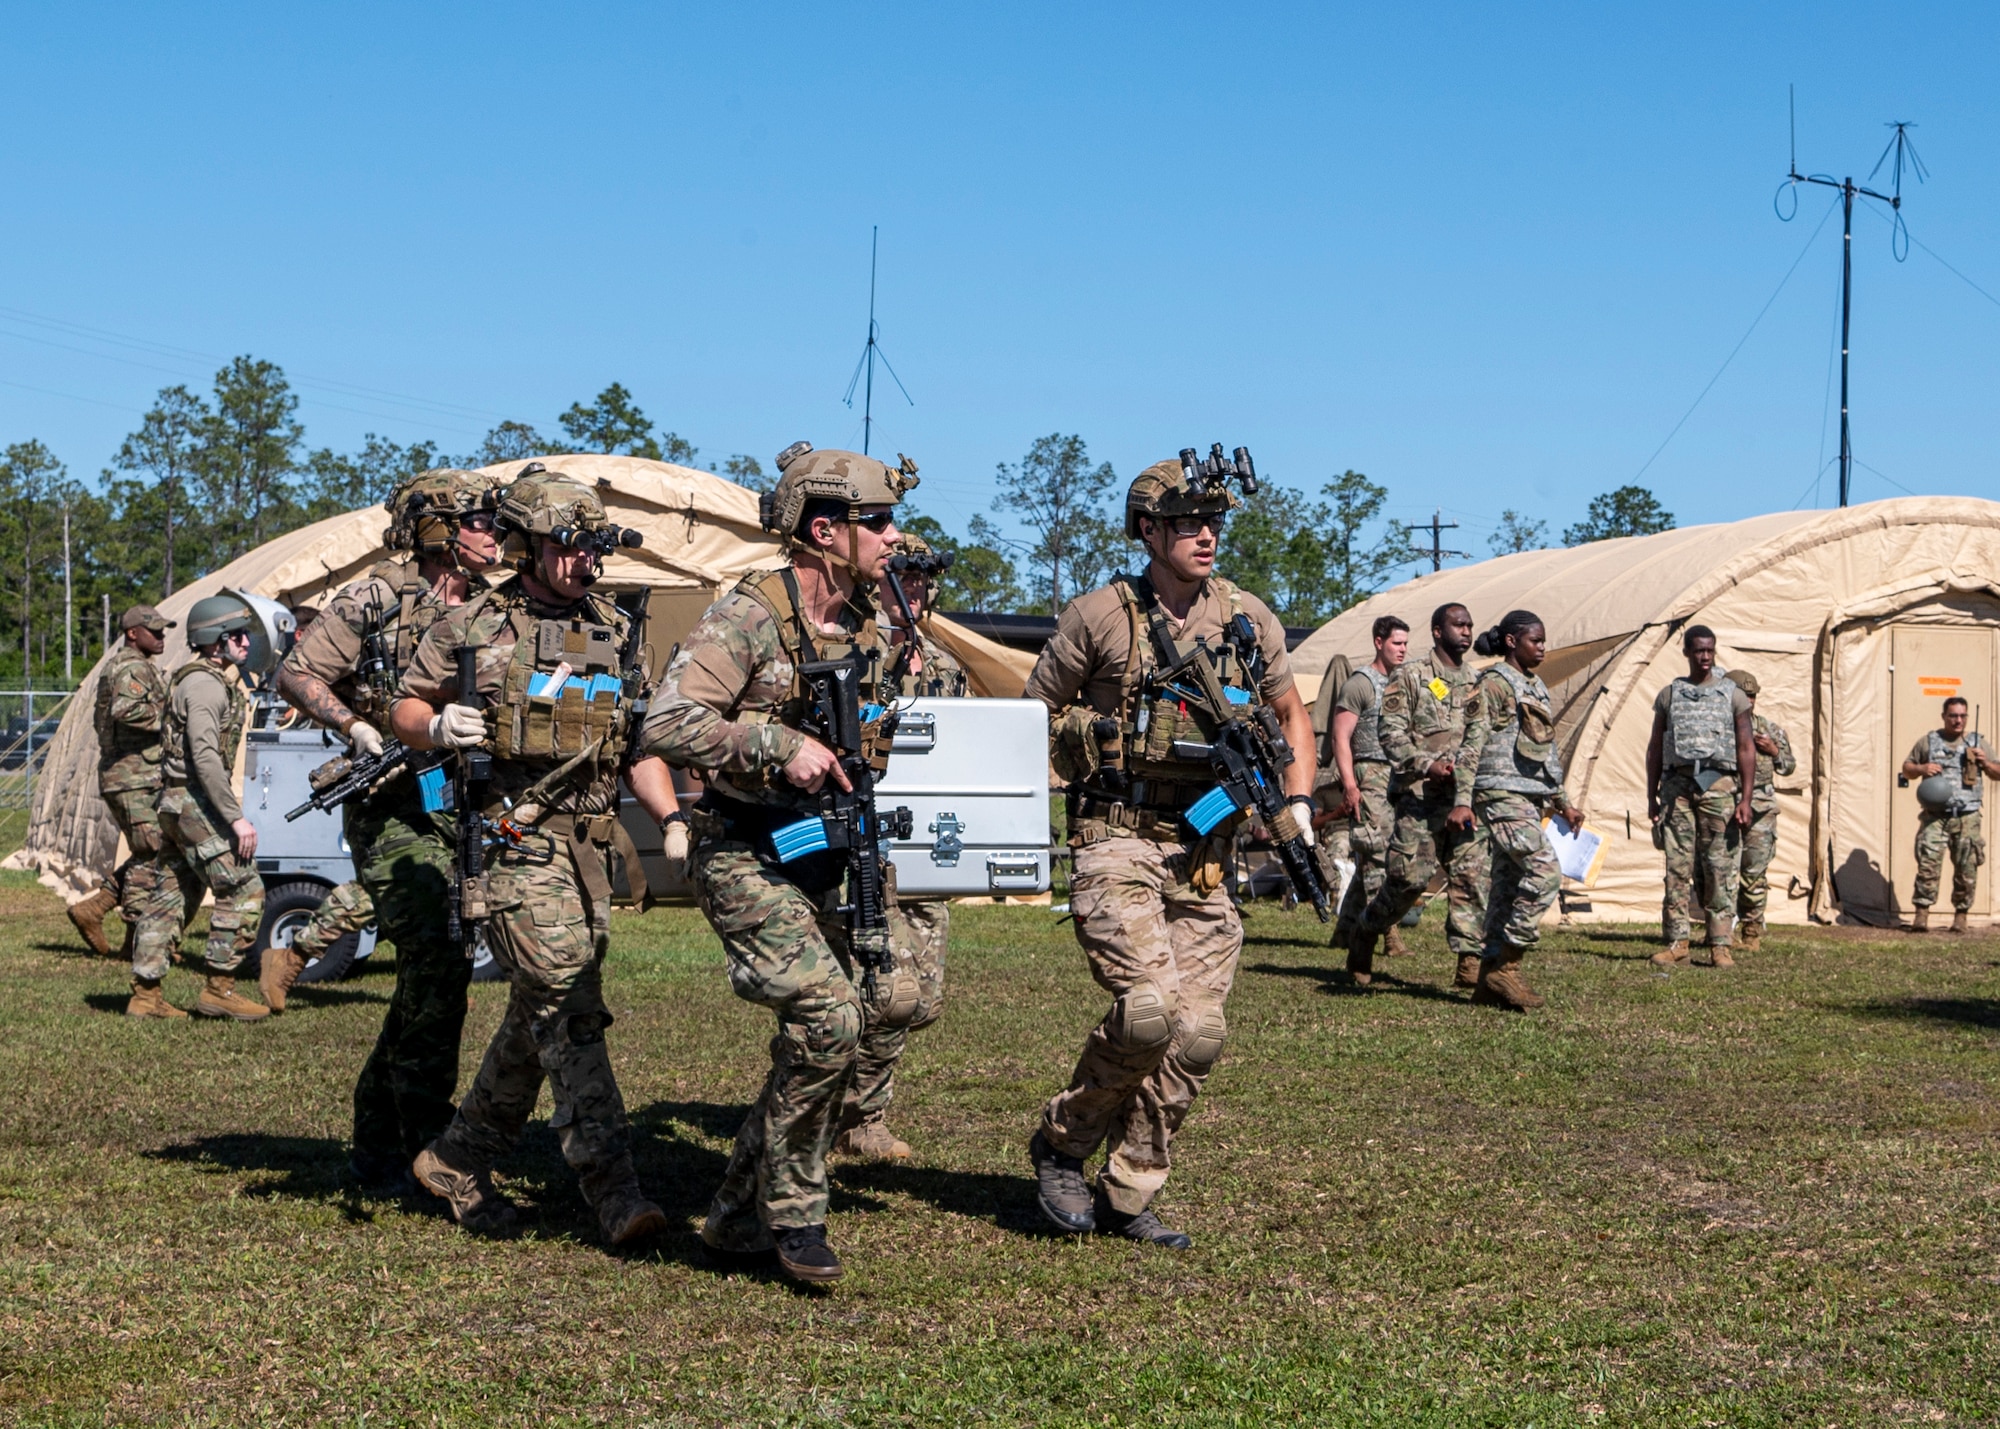 U.S. Air Force Airmen assigned to the 38th Rescue Squadron carry a casket during a simulated mass casualty exercise during Exercise Ready Tiger 24-1 at Avon Park Air Force Range, Florida, April 14, 2024. Pararescuemen were able to evacuate the simulated wounded and casualties in a short amount of time. Built upon Air Combat Command's directive to assert air power in contested environments, Exercise Ready Tiger 24-1 aims to test and enhance the 23rd Wing’s proficiency in executing Lead Wing and Expeditionary Air Base concepts through Agile Combat Employment and command and control operations. (U.S. Air Force photo by Airman 1st Class Leonid Soubbotine)